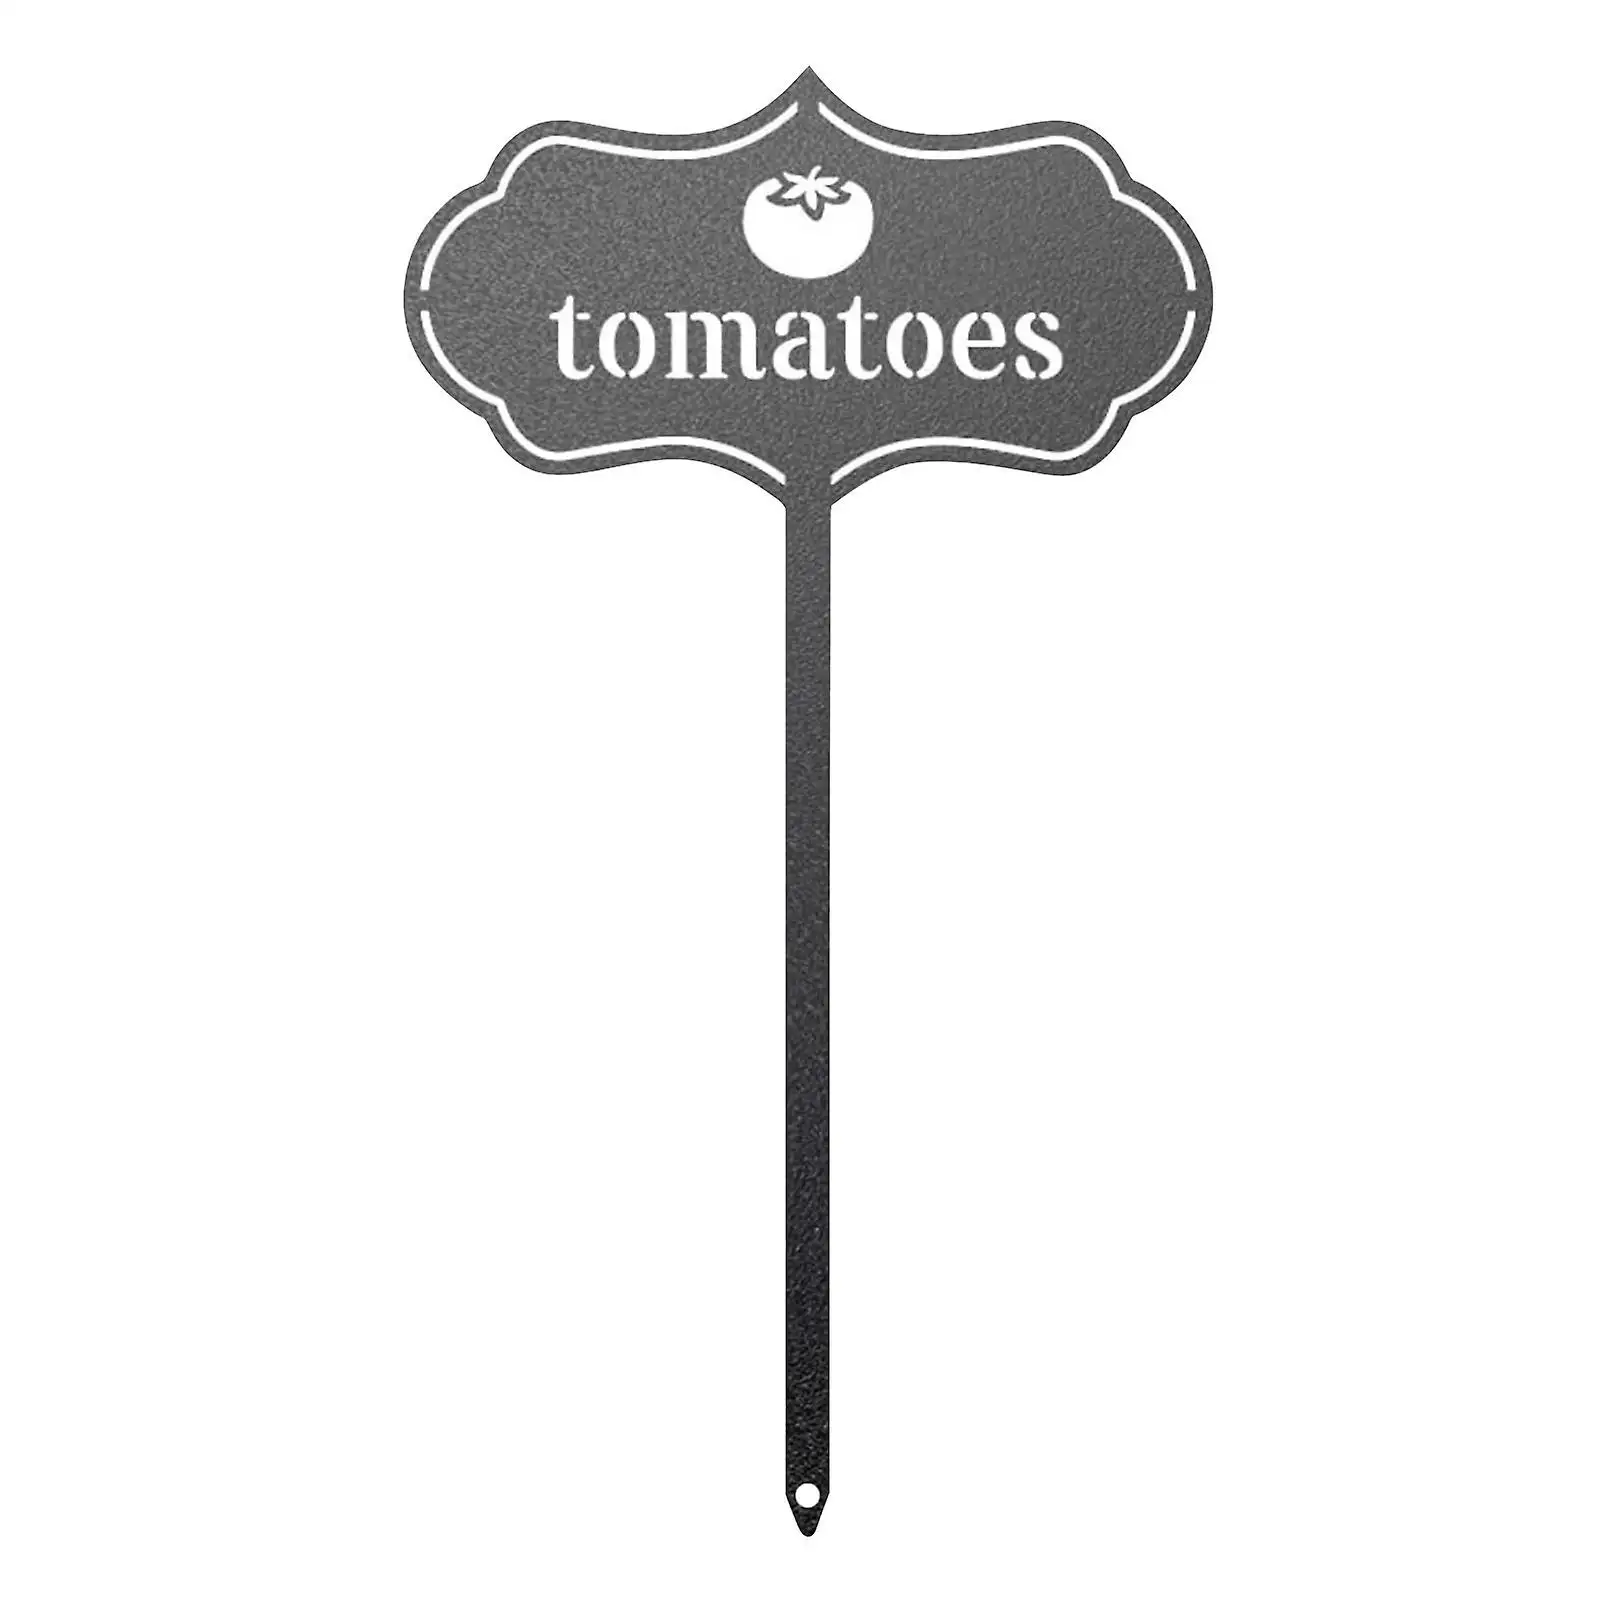 Tomatoes Named High Selling Name Plate For Garden Usage Or Name Tag In Durable Quality With Elegant Finished In Wholesale Price